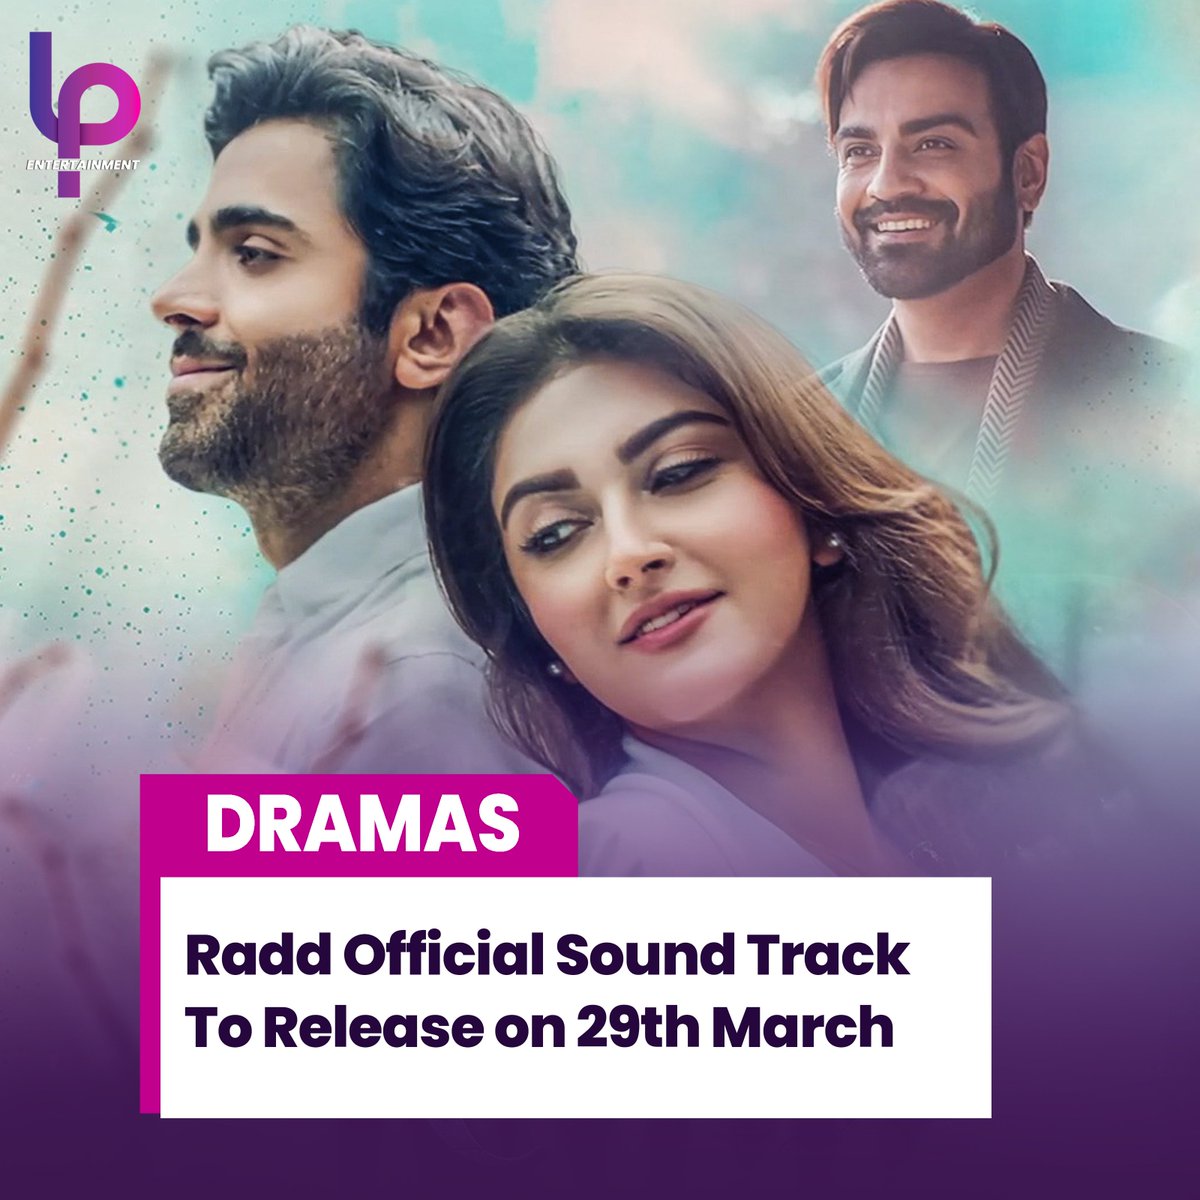 The official sound track of Radd took our attention straight away since first look release of drama. It's OST is now officially releasing on 29th March on ARY Digital. 

Drama starting soon. 🙌 

#RaddTheDrama #SheheryarMunawar #HibaBukhari #ArslanNaseer #LPEntertainment